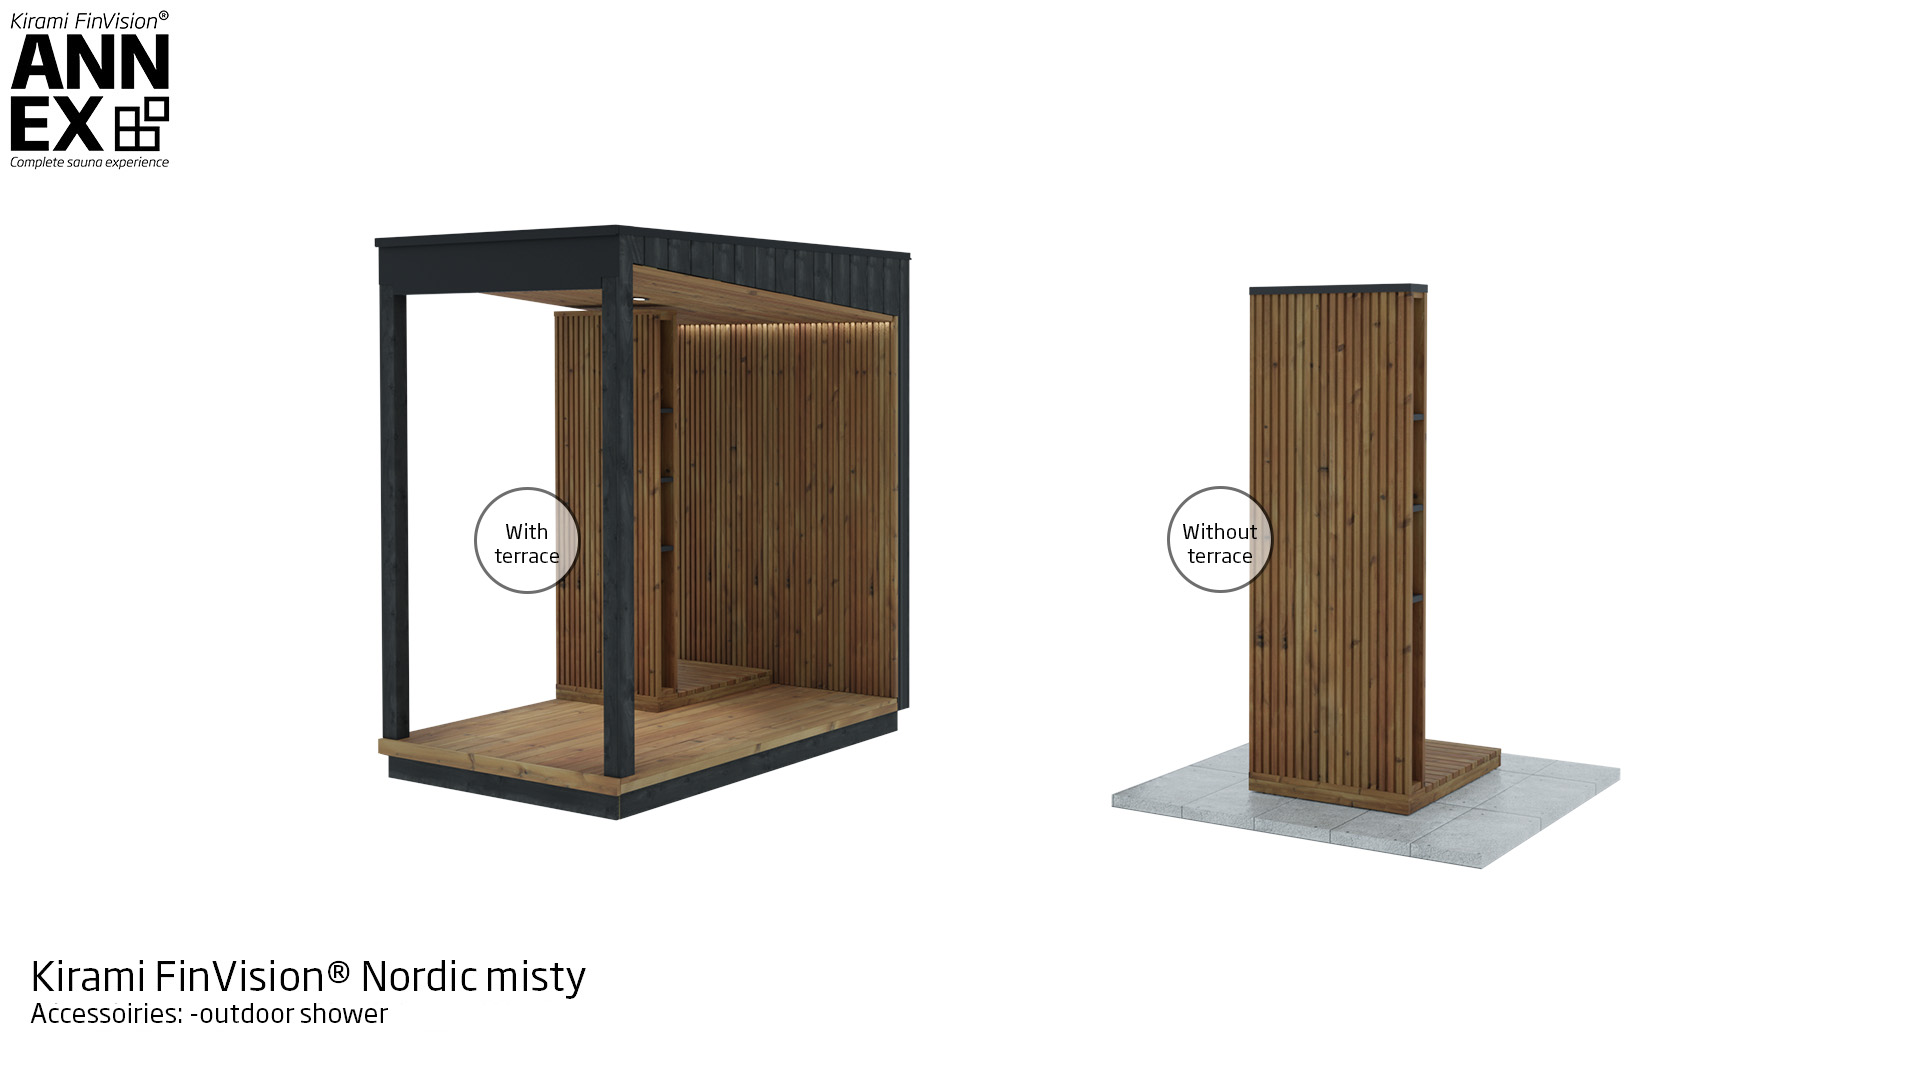 Kirami FinVision® Nordic misty,  - outdoor shower modules, terrace and without terrace module | Kirami FinVision® Annex